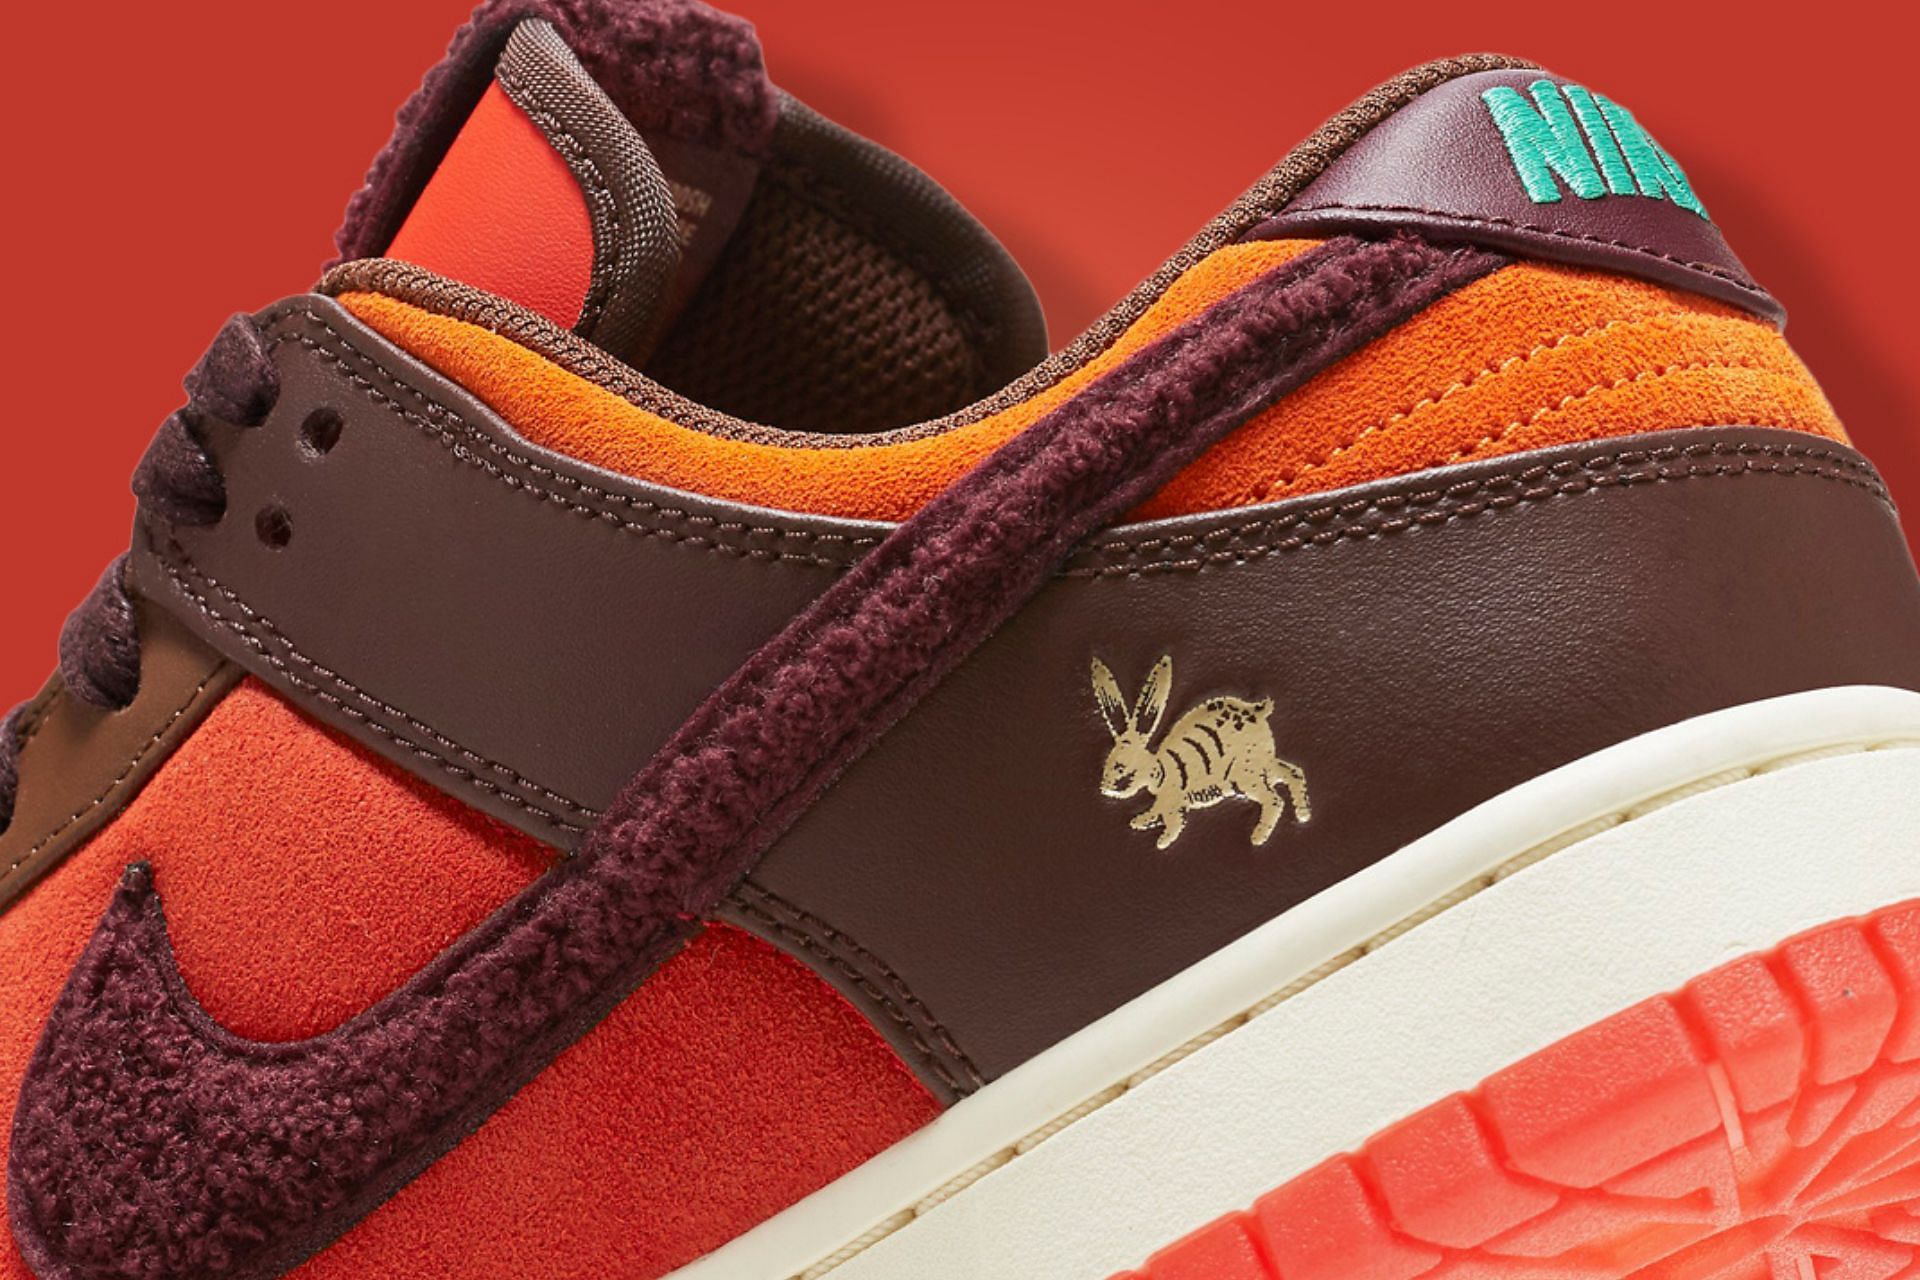 The heel areas are embellished with the Chinese zodiac sign of these Nike Dunk Low (Image via Nike)